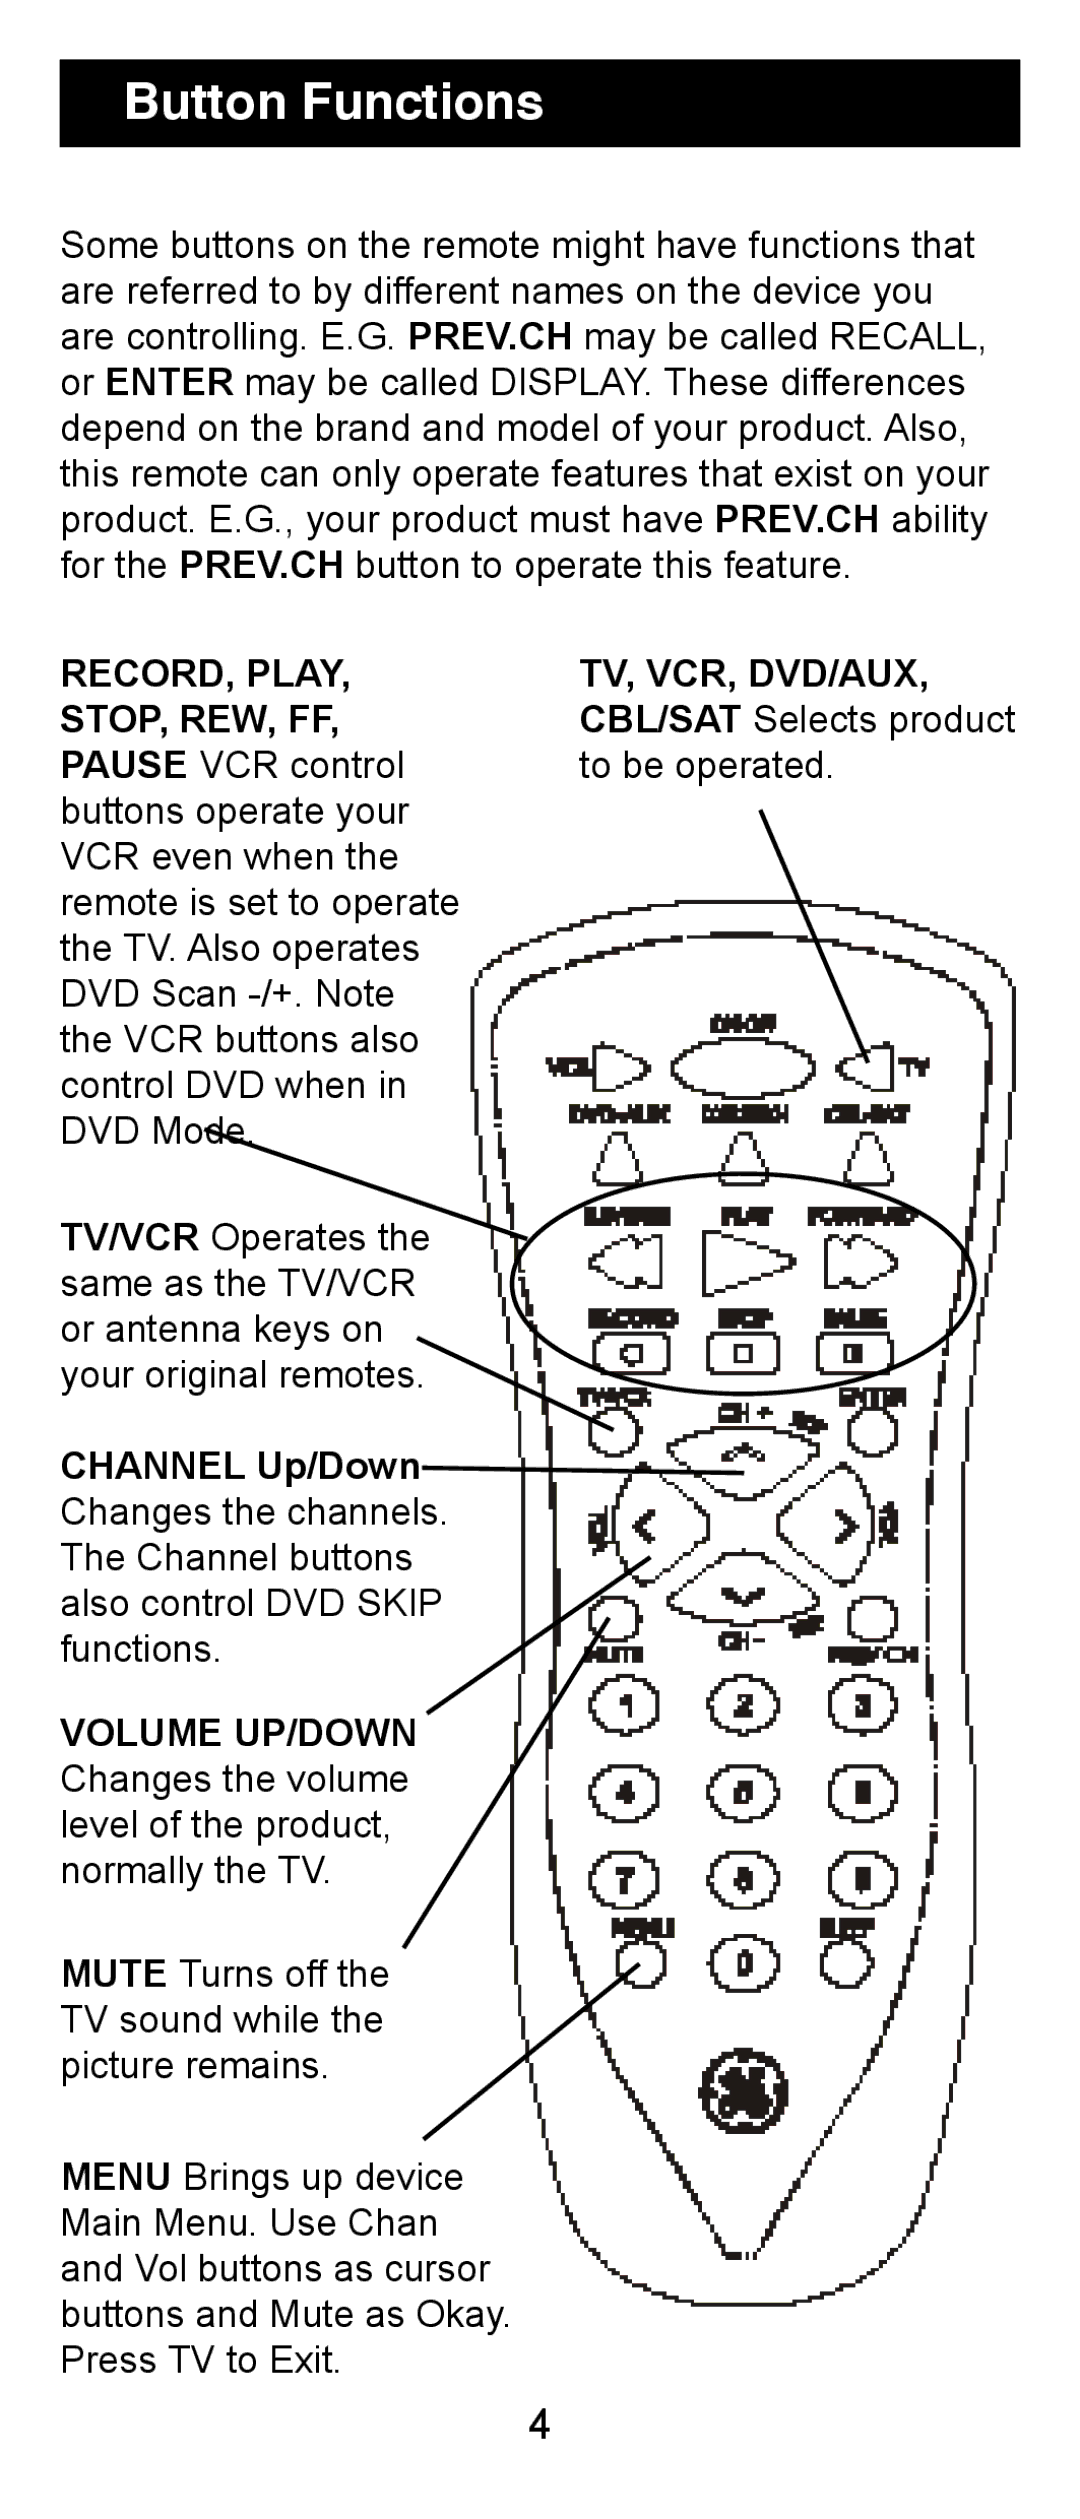 Jasco RM24906 instruction manual Button Functions, RECORD, Play TV, VCR, DVD/AUX STOP, REW, FF 